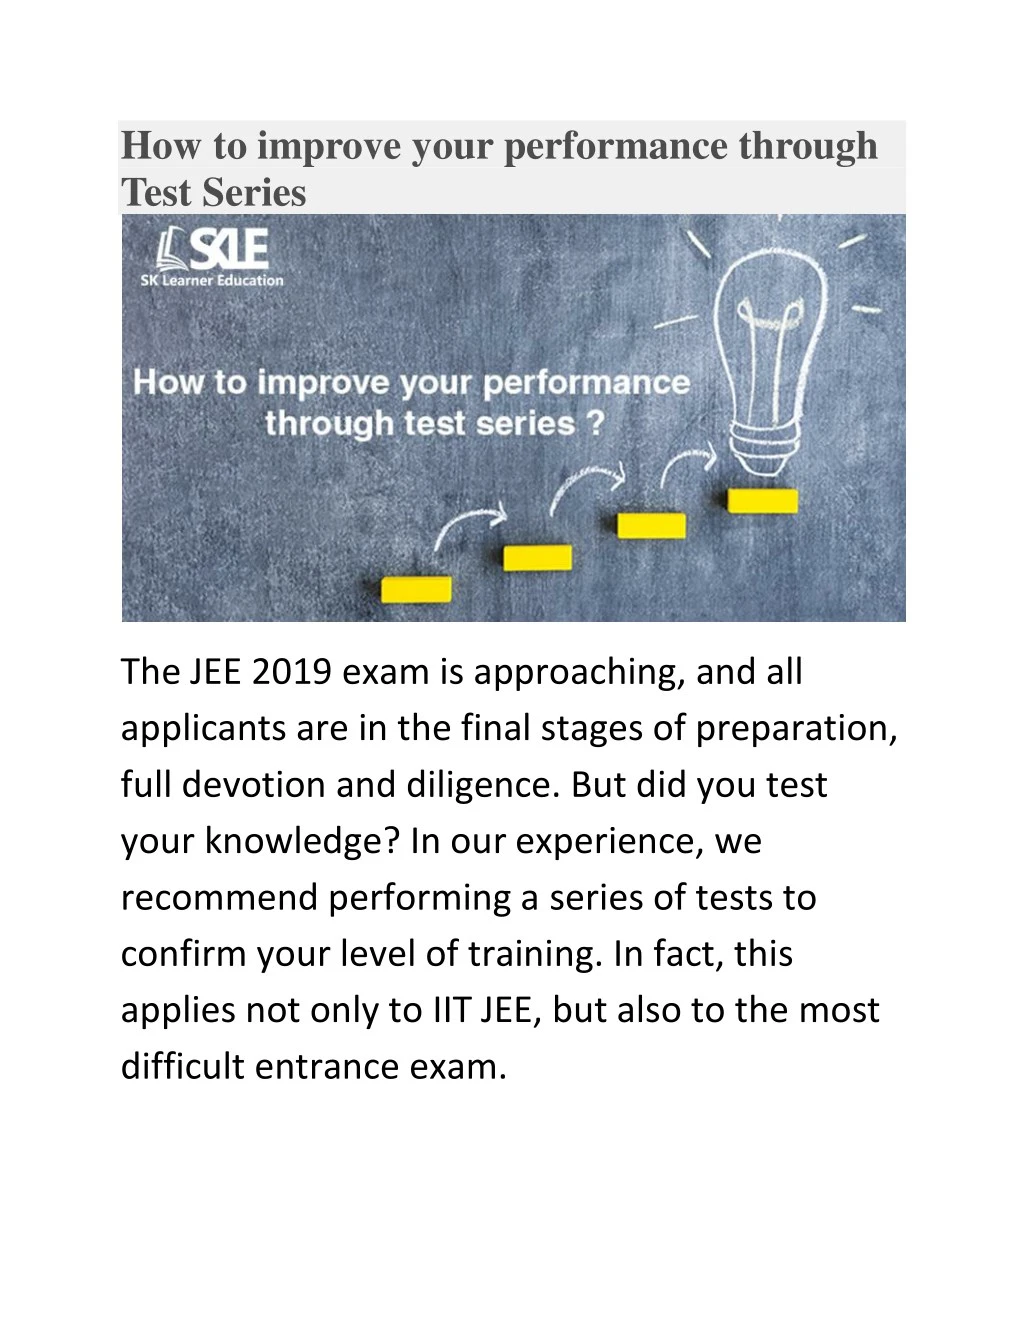 how to improve your performance through test